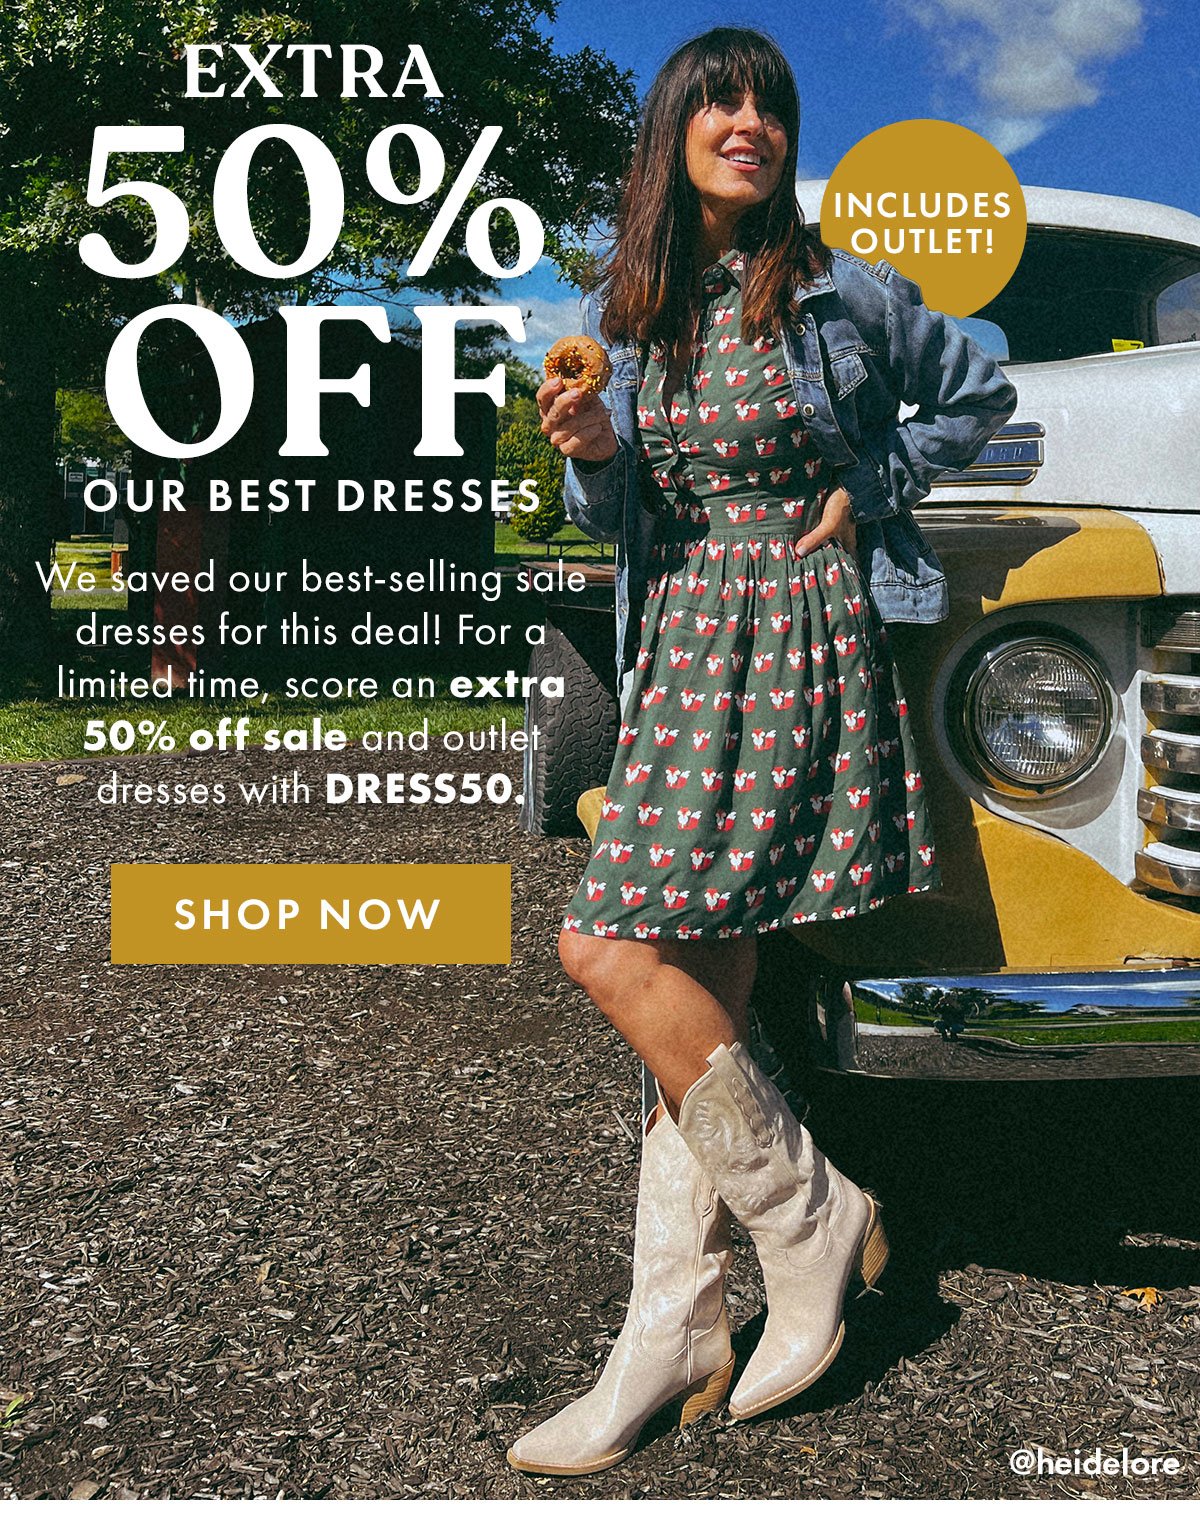 Extra 50% Off Our Best Dresses